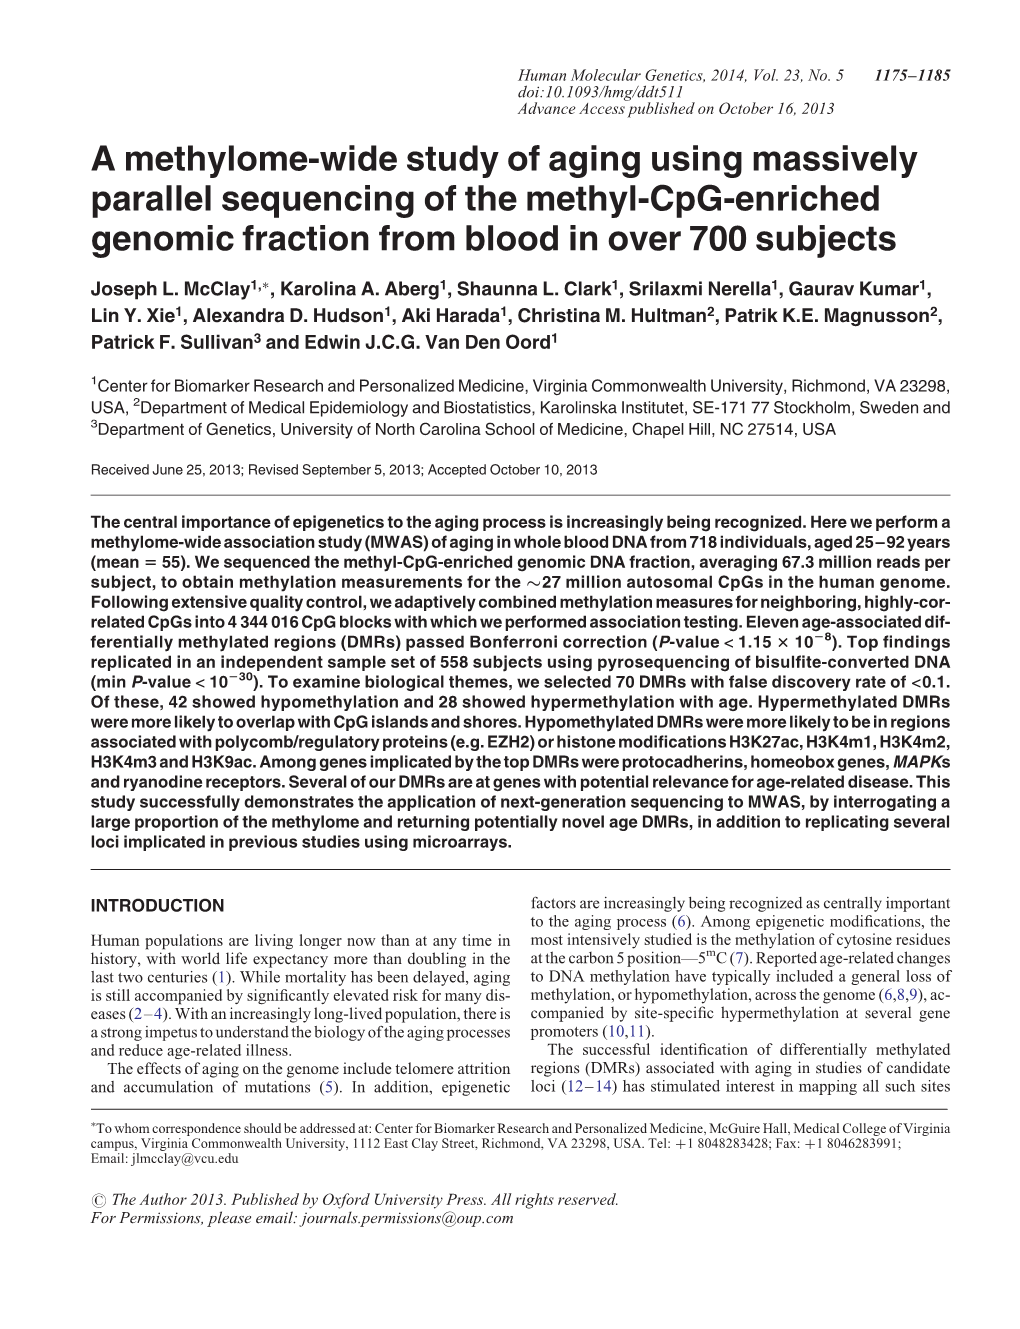 A Methylome-Wide Study of Aging Using Massively Parallel Sequencing of the Methyl-Cpg-Enriched Genomic Fraction from Blood in Over 700 Subjects